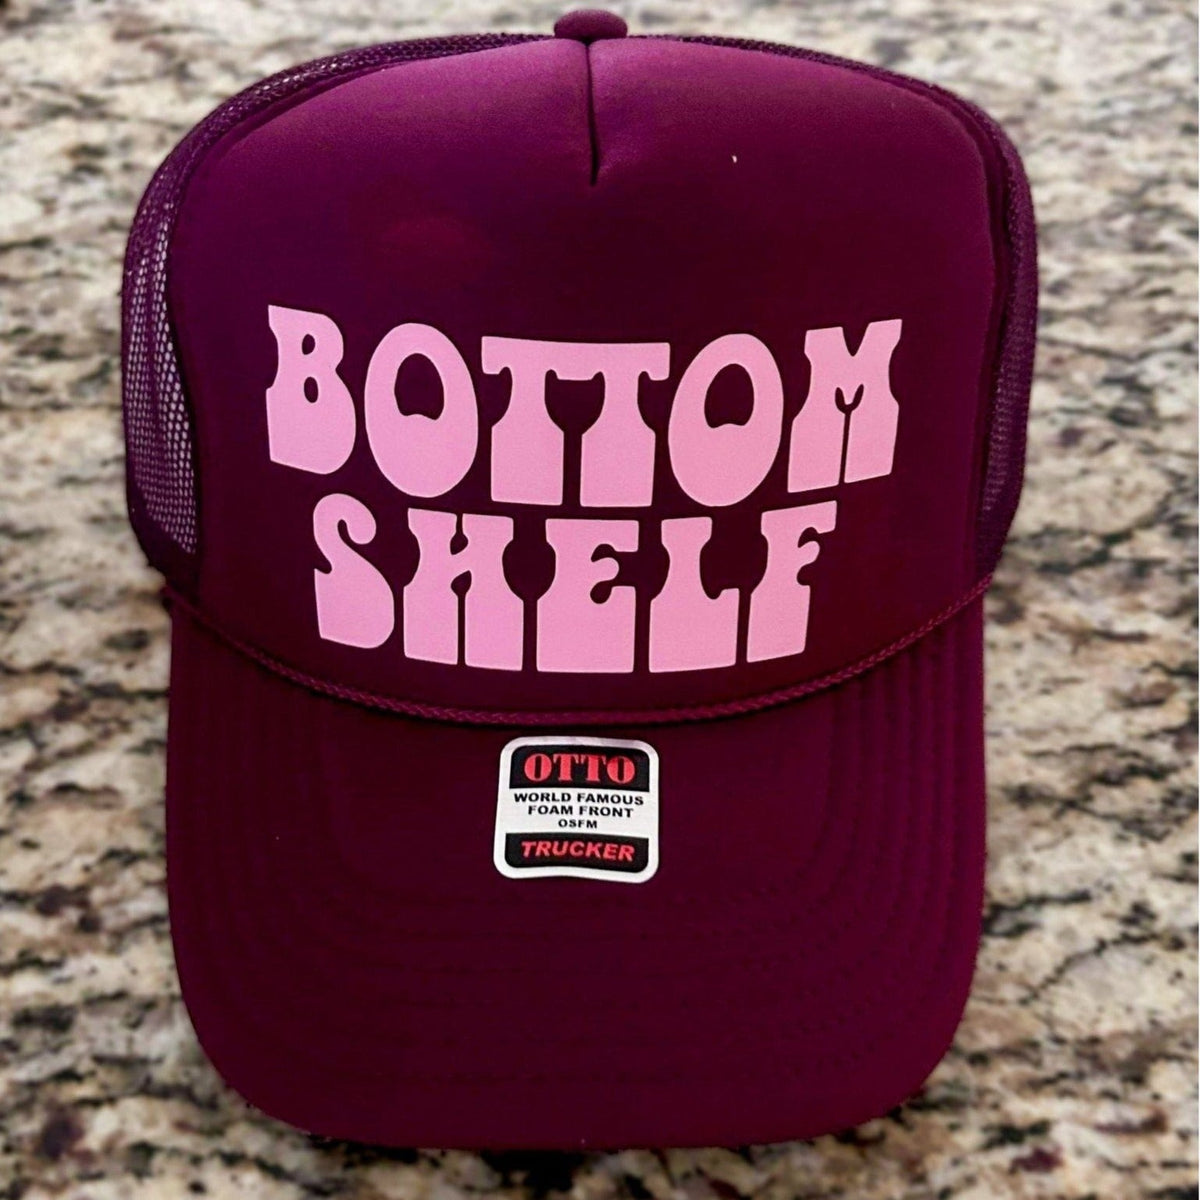 Bottom Shelf | Maroon and Pink Trucker Hat by Haute Sheet | Funny Alcohol related Hats TheFringeCultureCollective